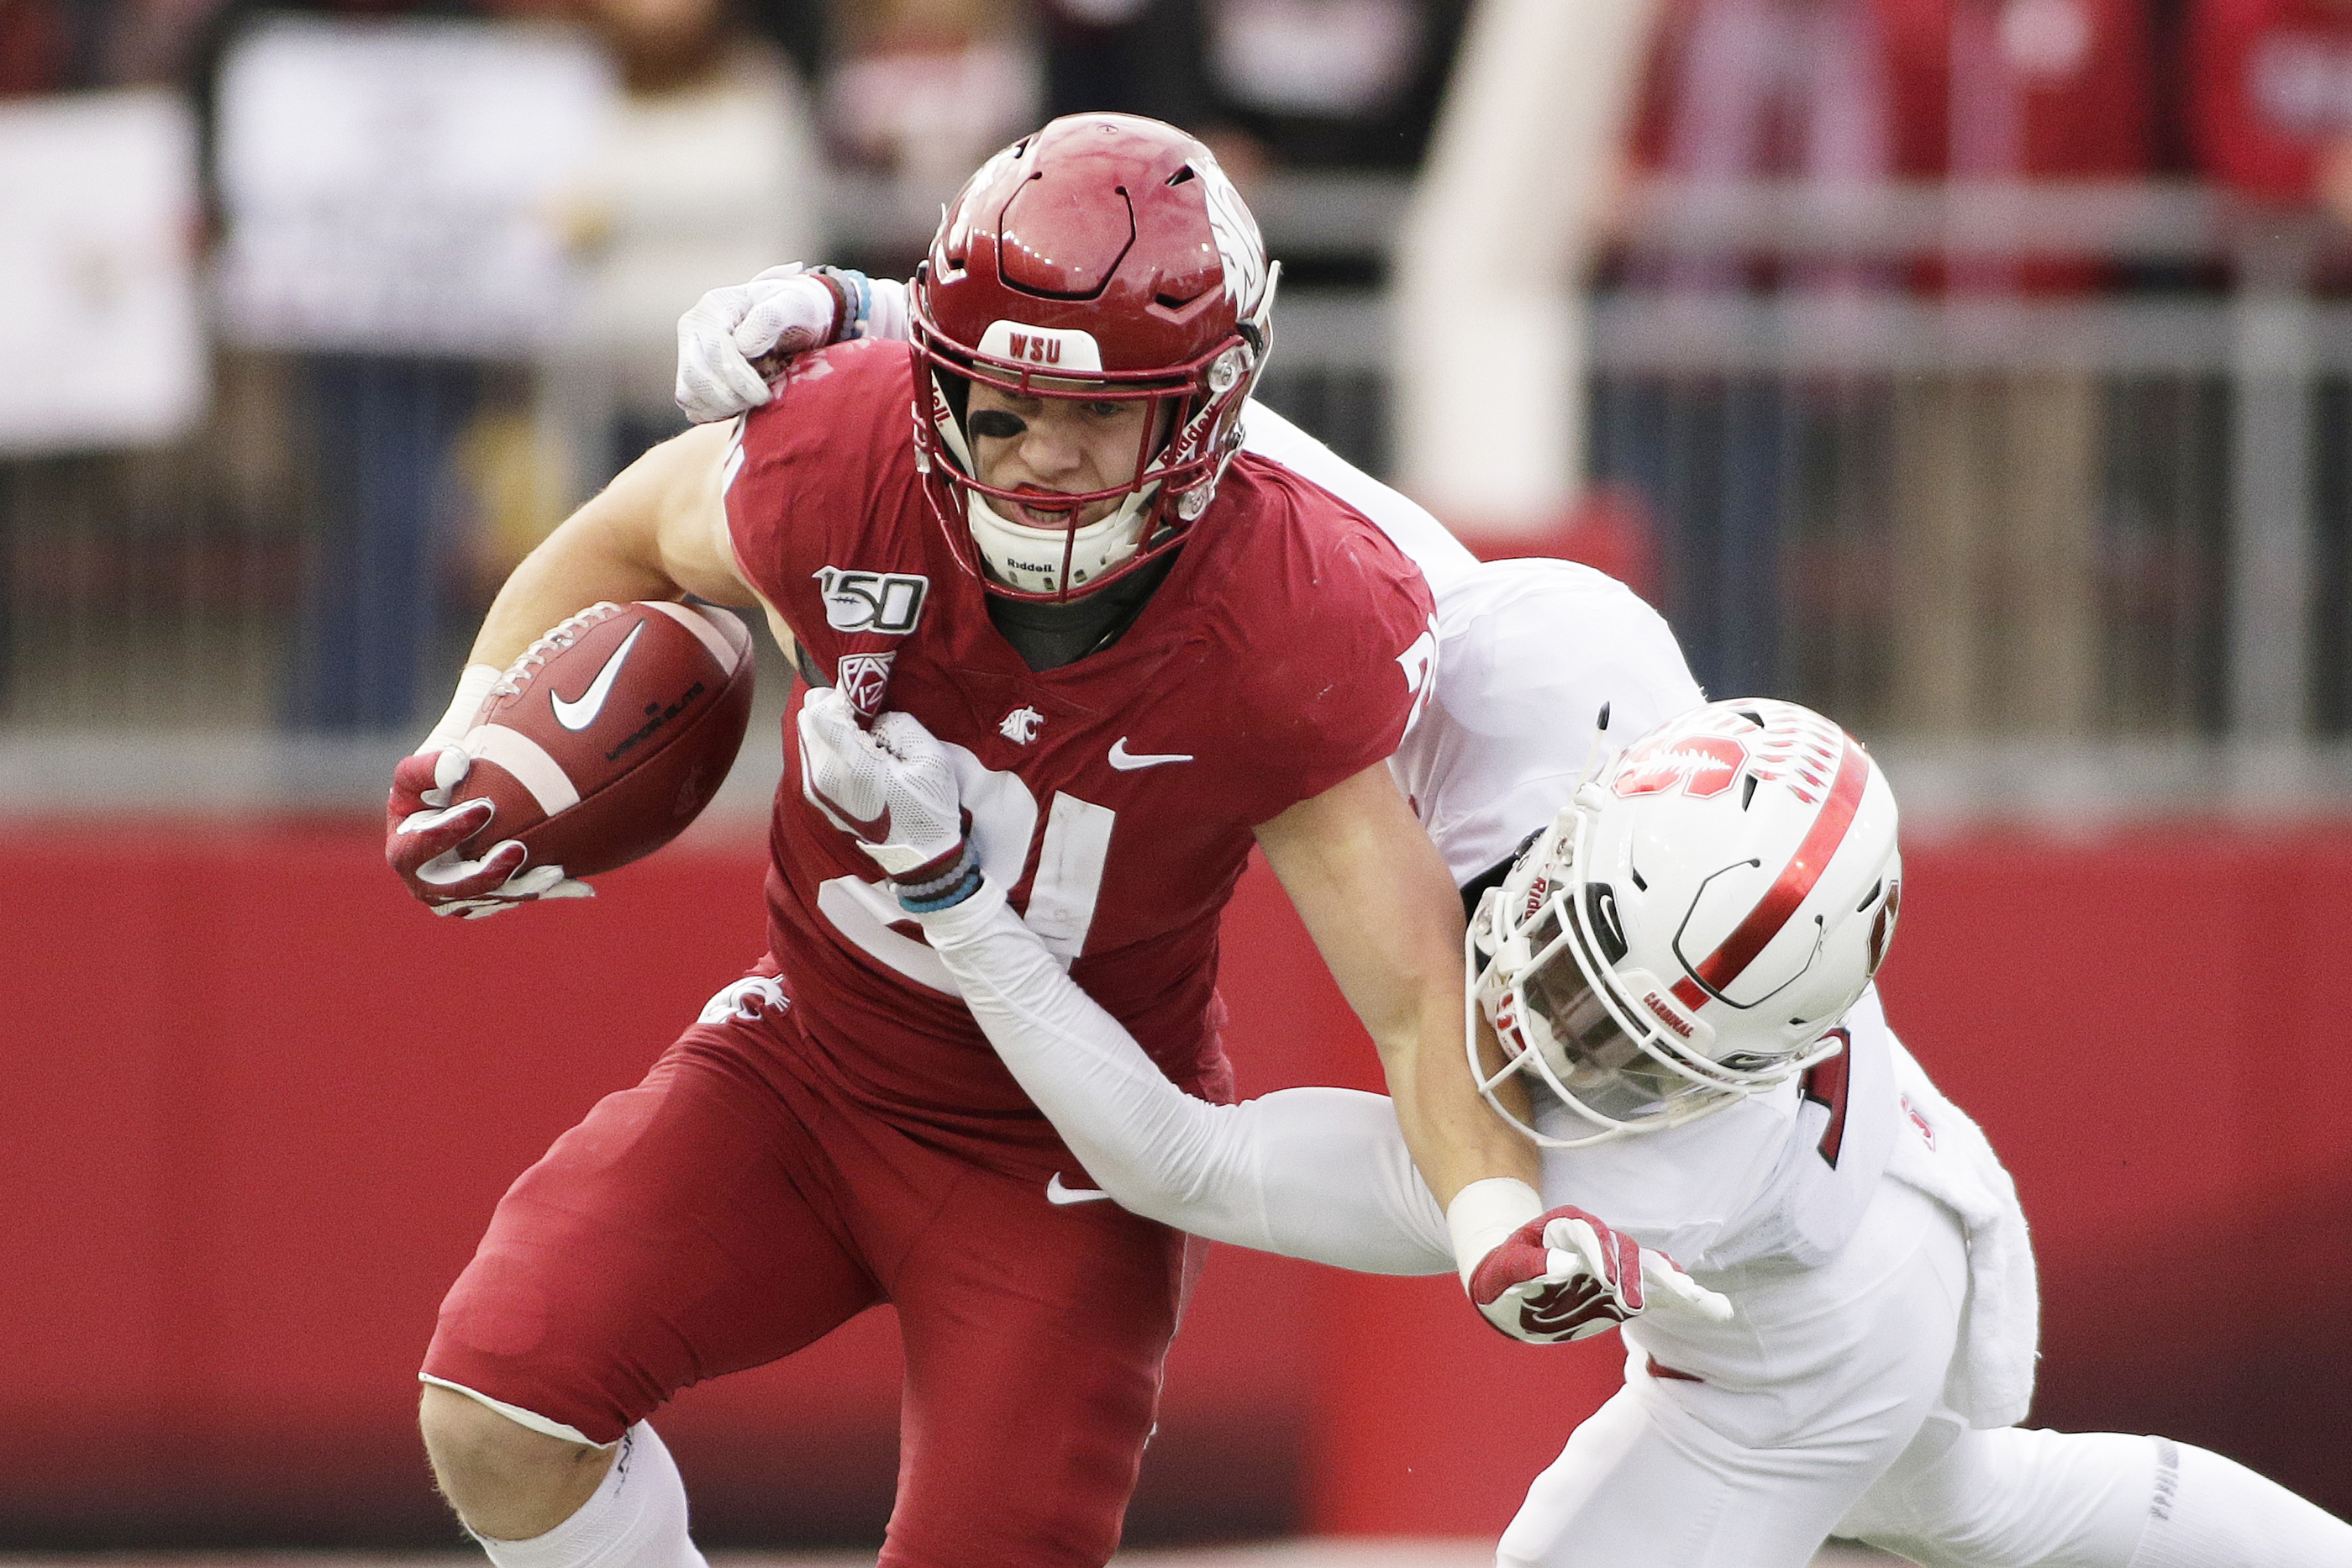 Bowl eligibility looms large when Cougars host Beavers